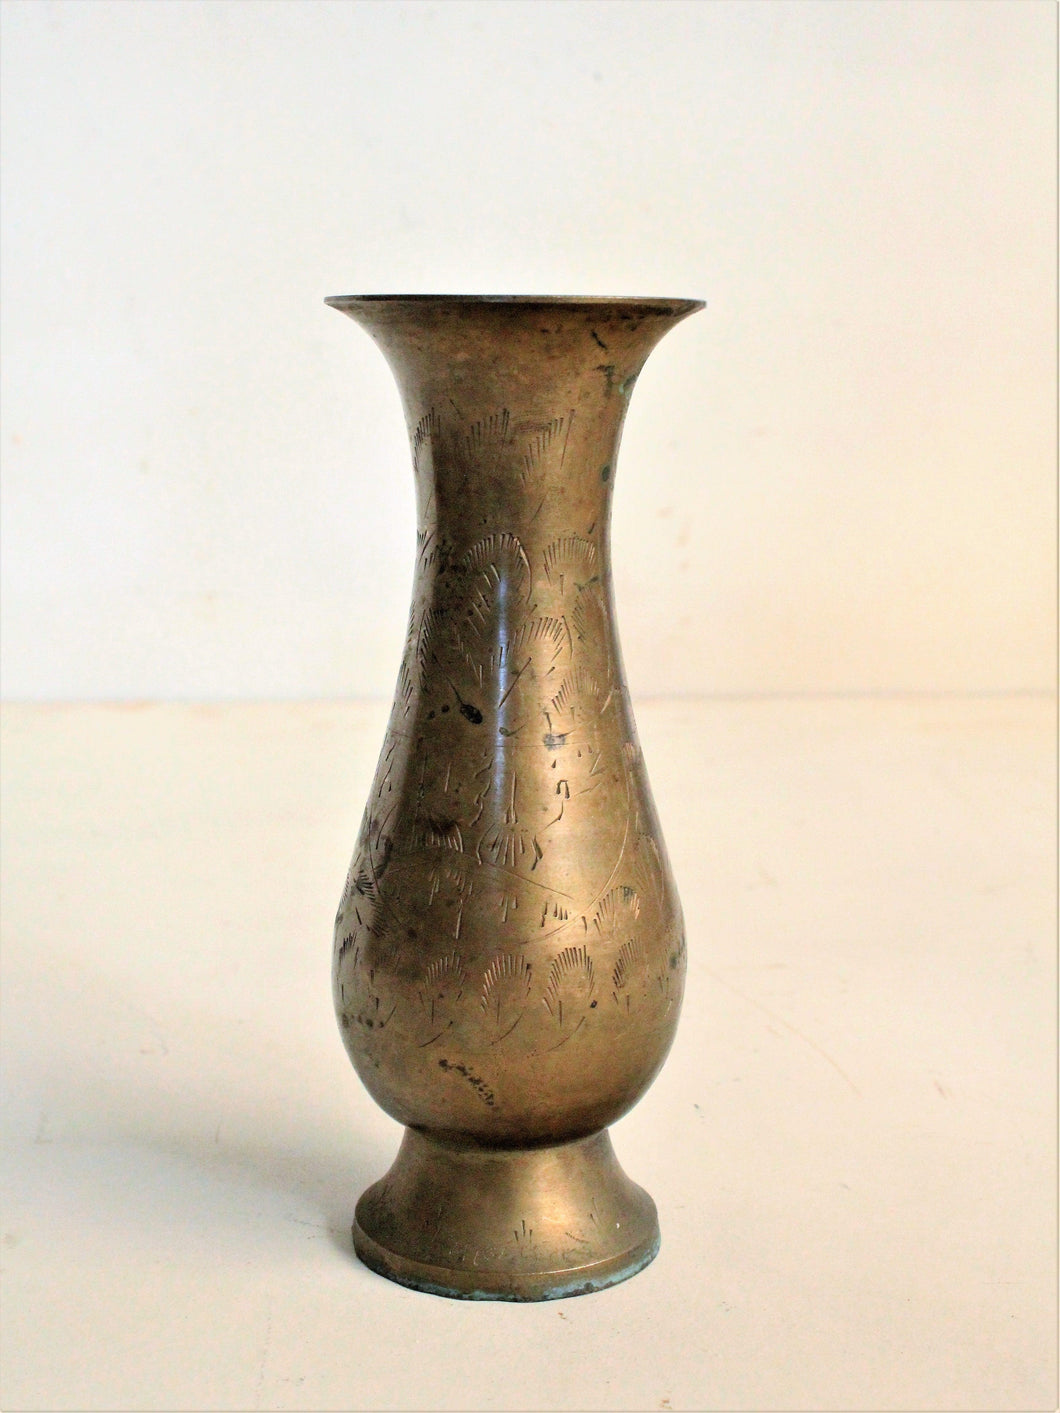 Beautiful Vintage Brass Hand-Carved Vase - Style It by Hanika